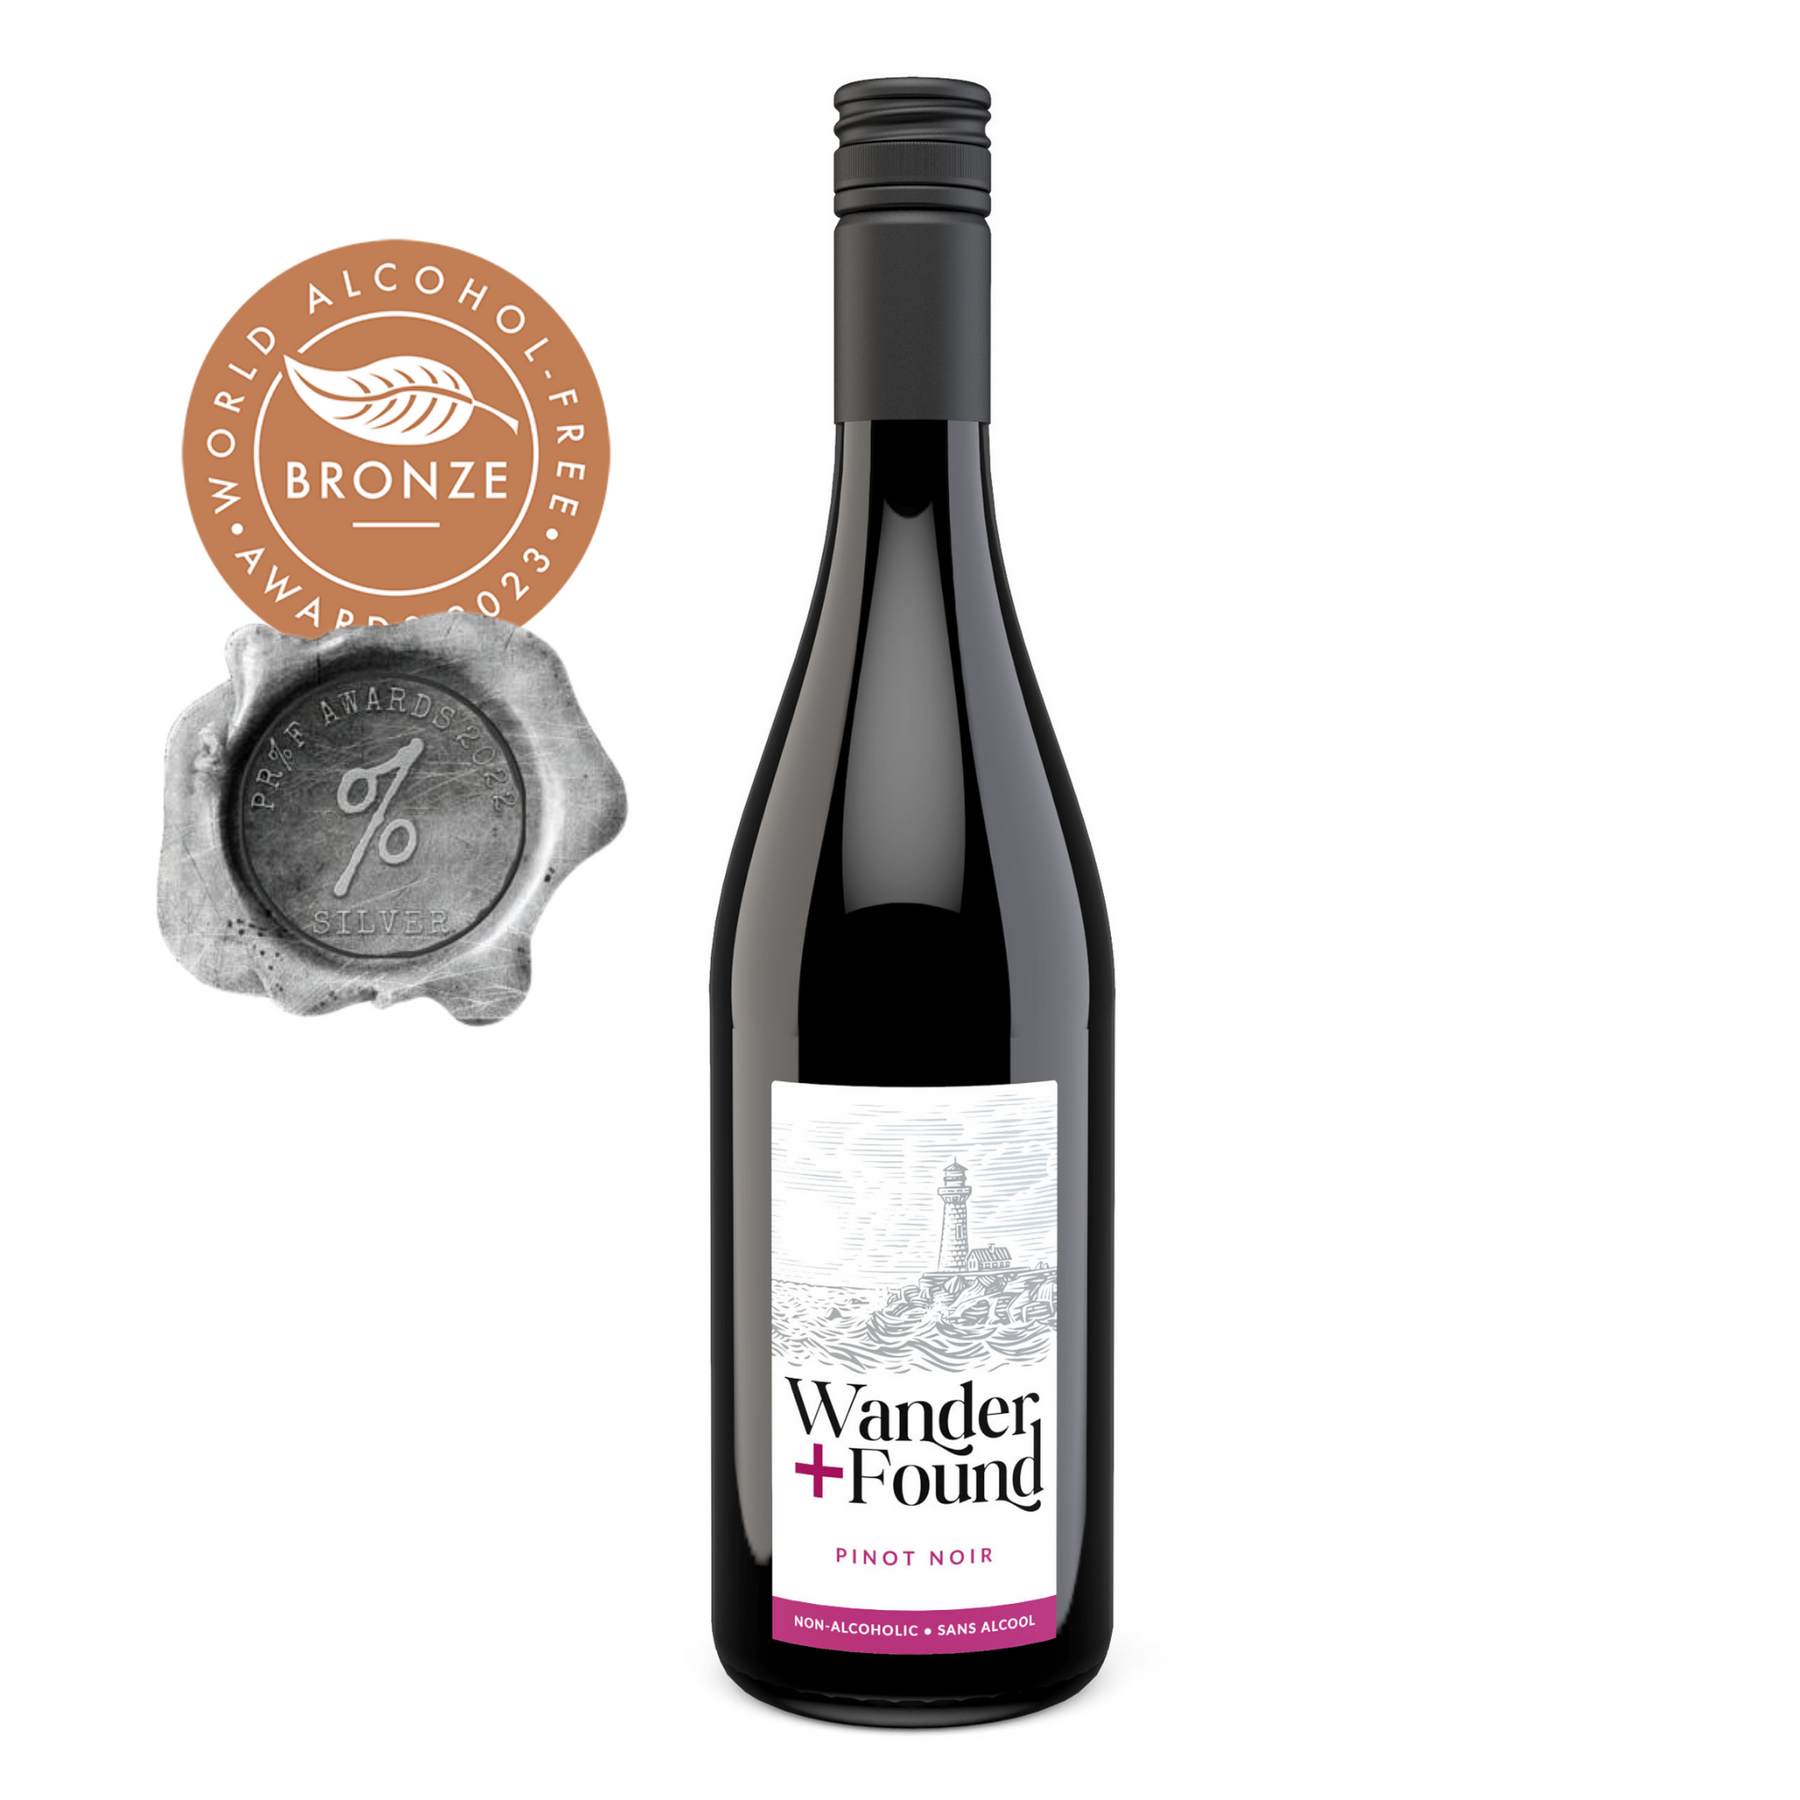 Best Pinot Noir Wine - Wander Found Dealcoholized Red wine – PSAlcoholFree